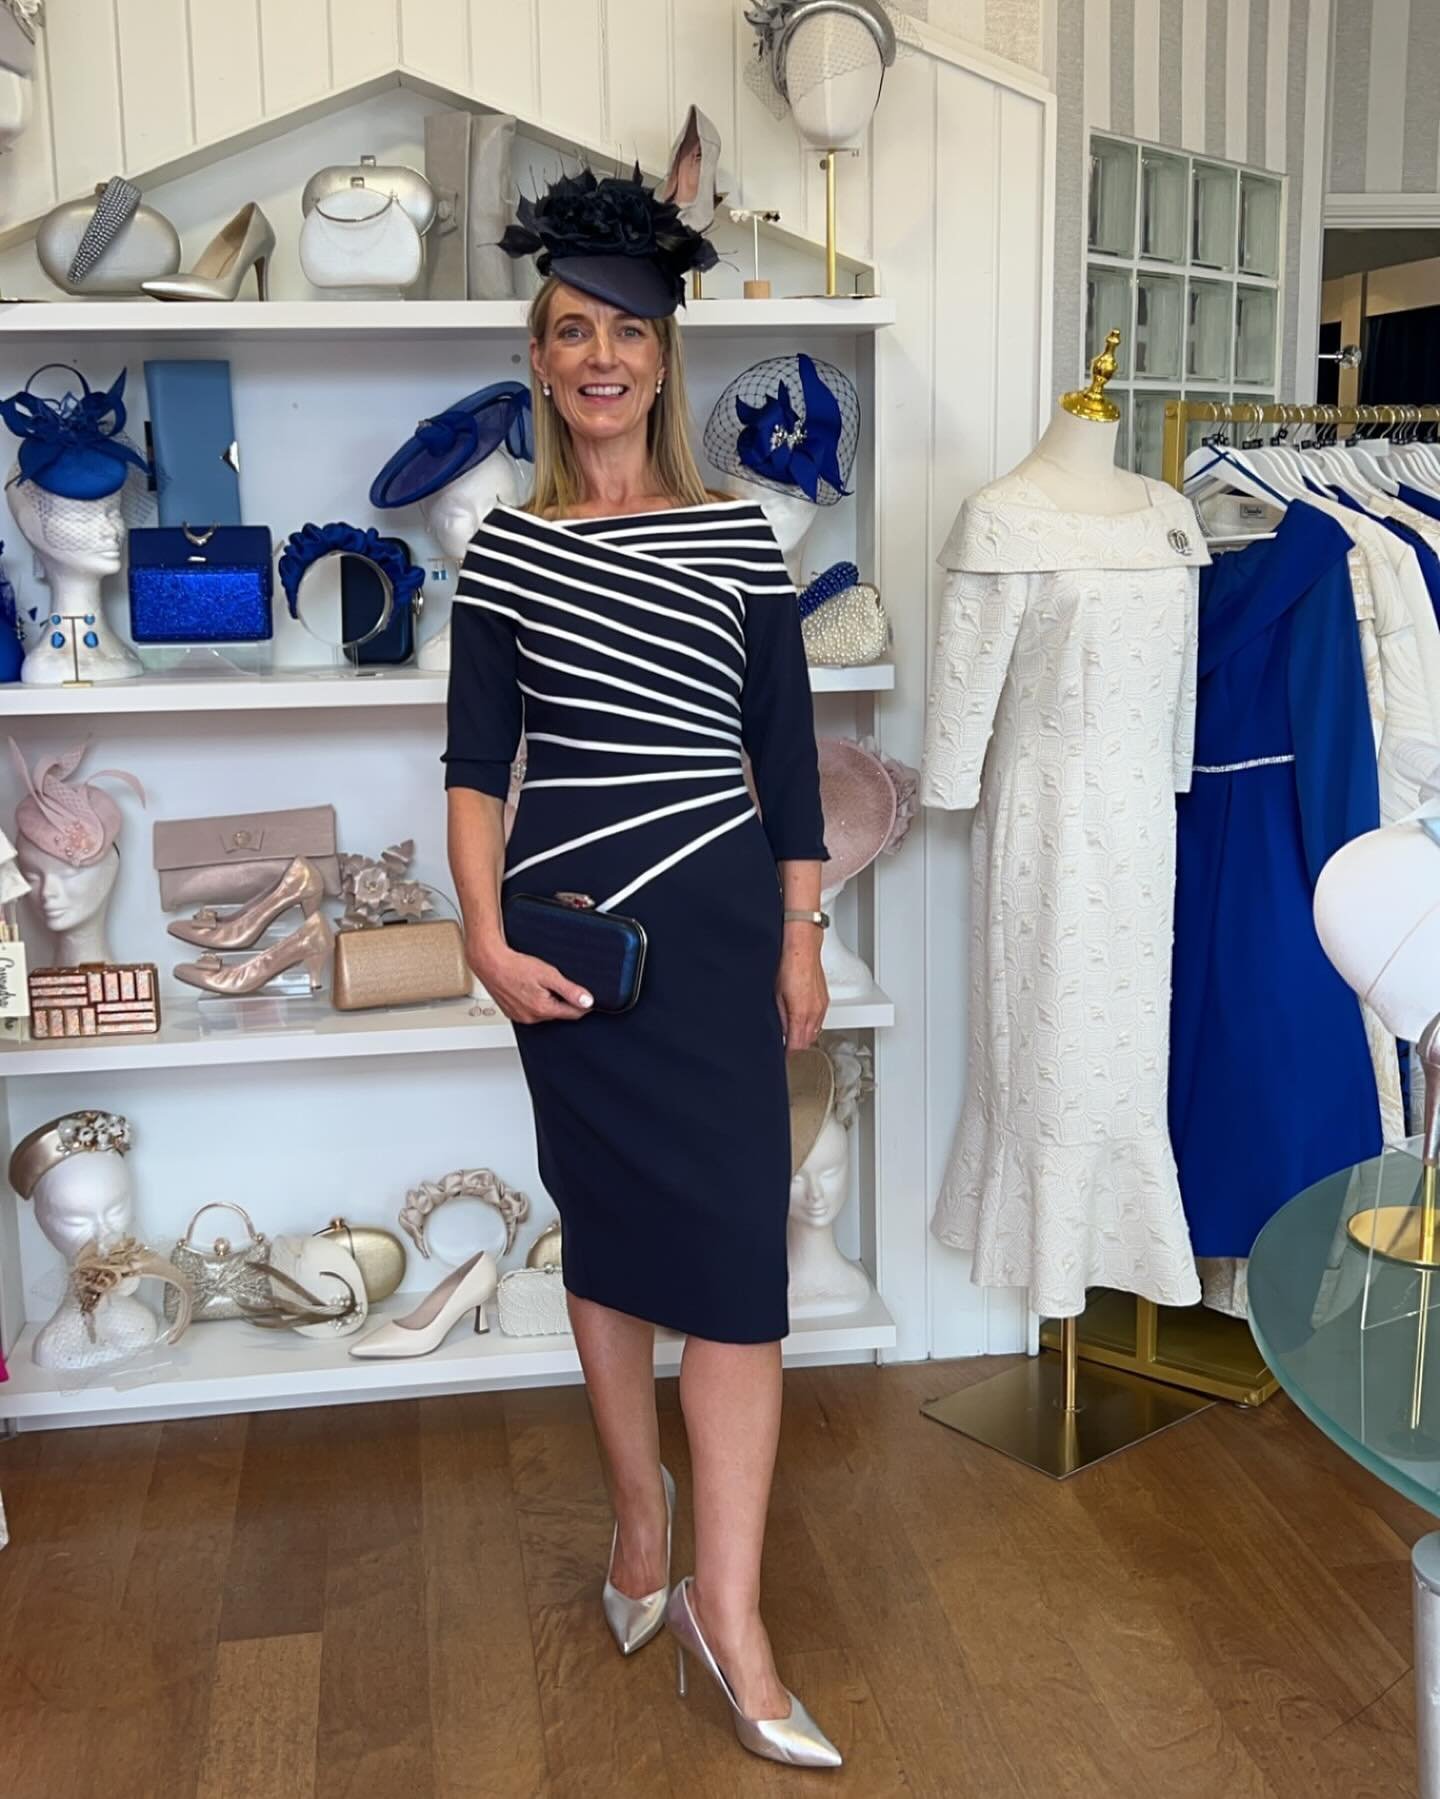 🤍🥂 Classic Navy with White piping. Timeless style in a flattering pencil dress.
Full look available in store , sizes 10-18
Fiona x 
#occassionwear #wedding #classic